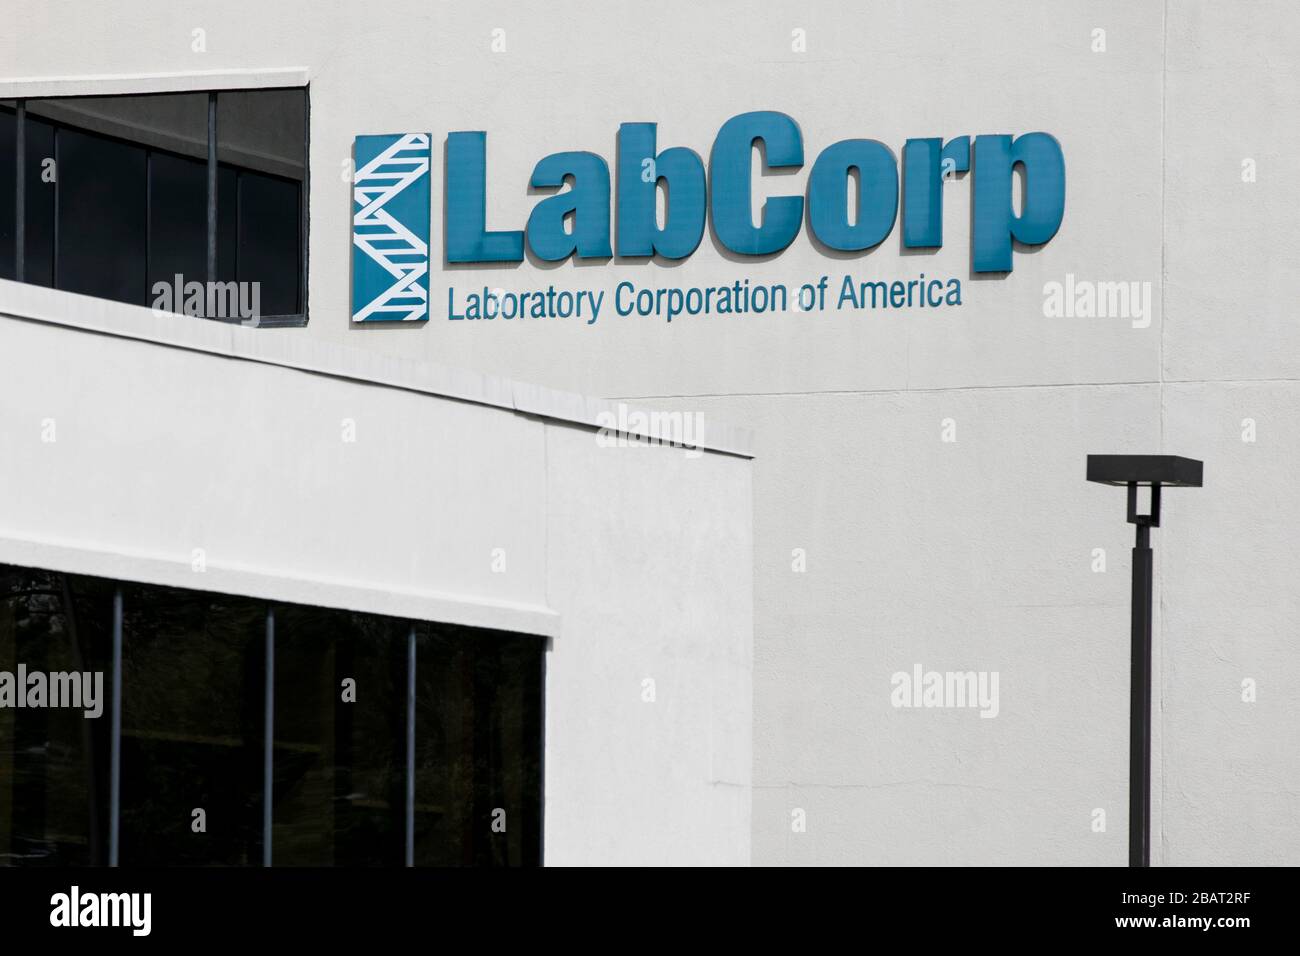 A logo sign outside of a facility occupied by Laboratory Corporation of America (LabCorp) in Raritan, New Jersey, on March 23, 2020. Stock Photo